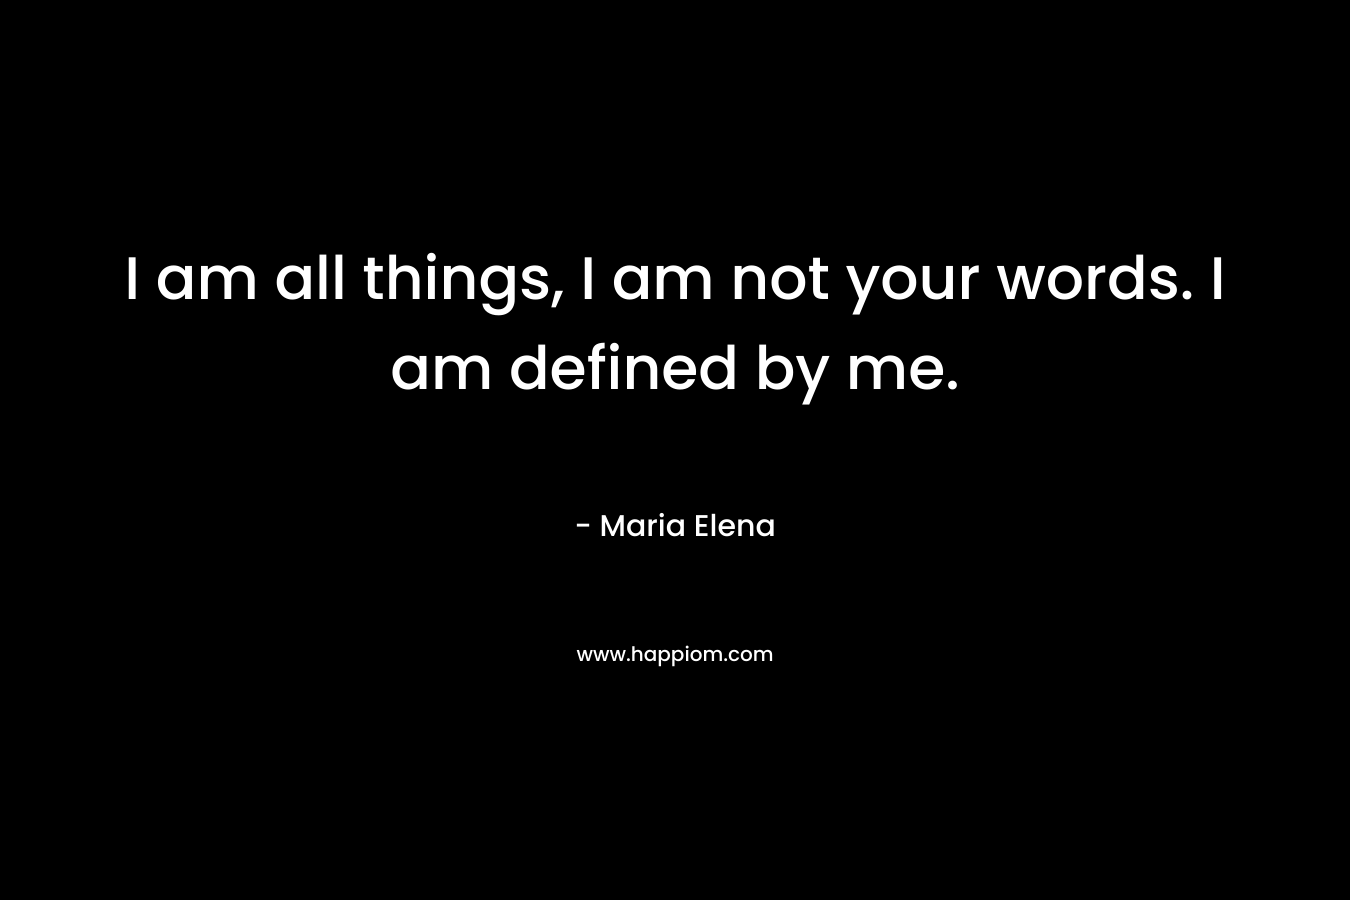 I am all things, I am not your words. I am defined by me.